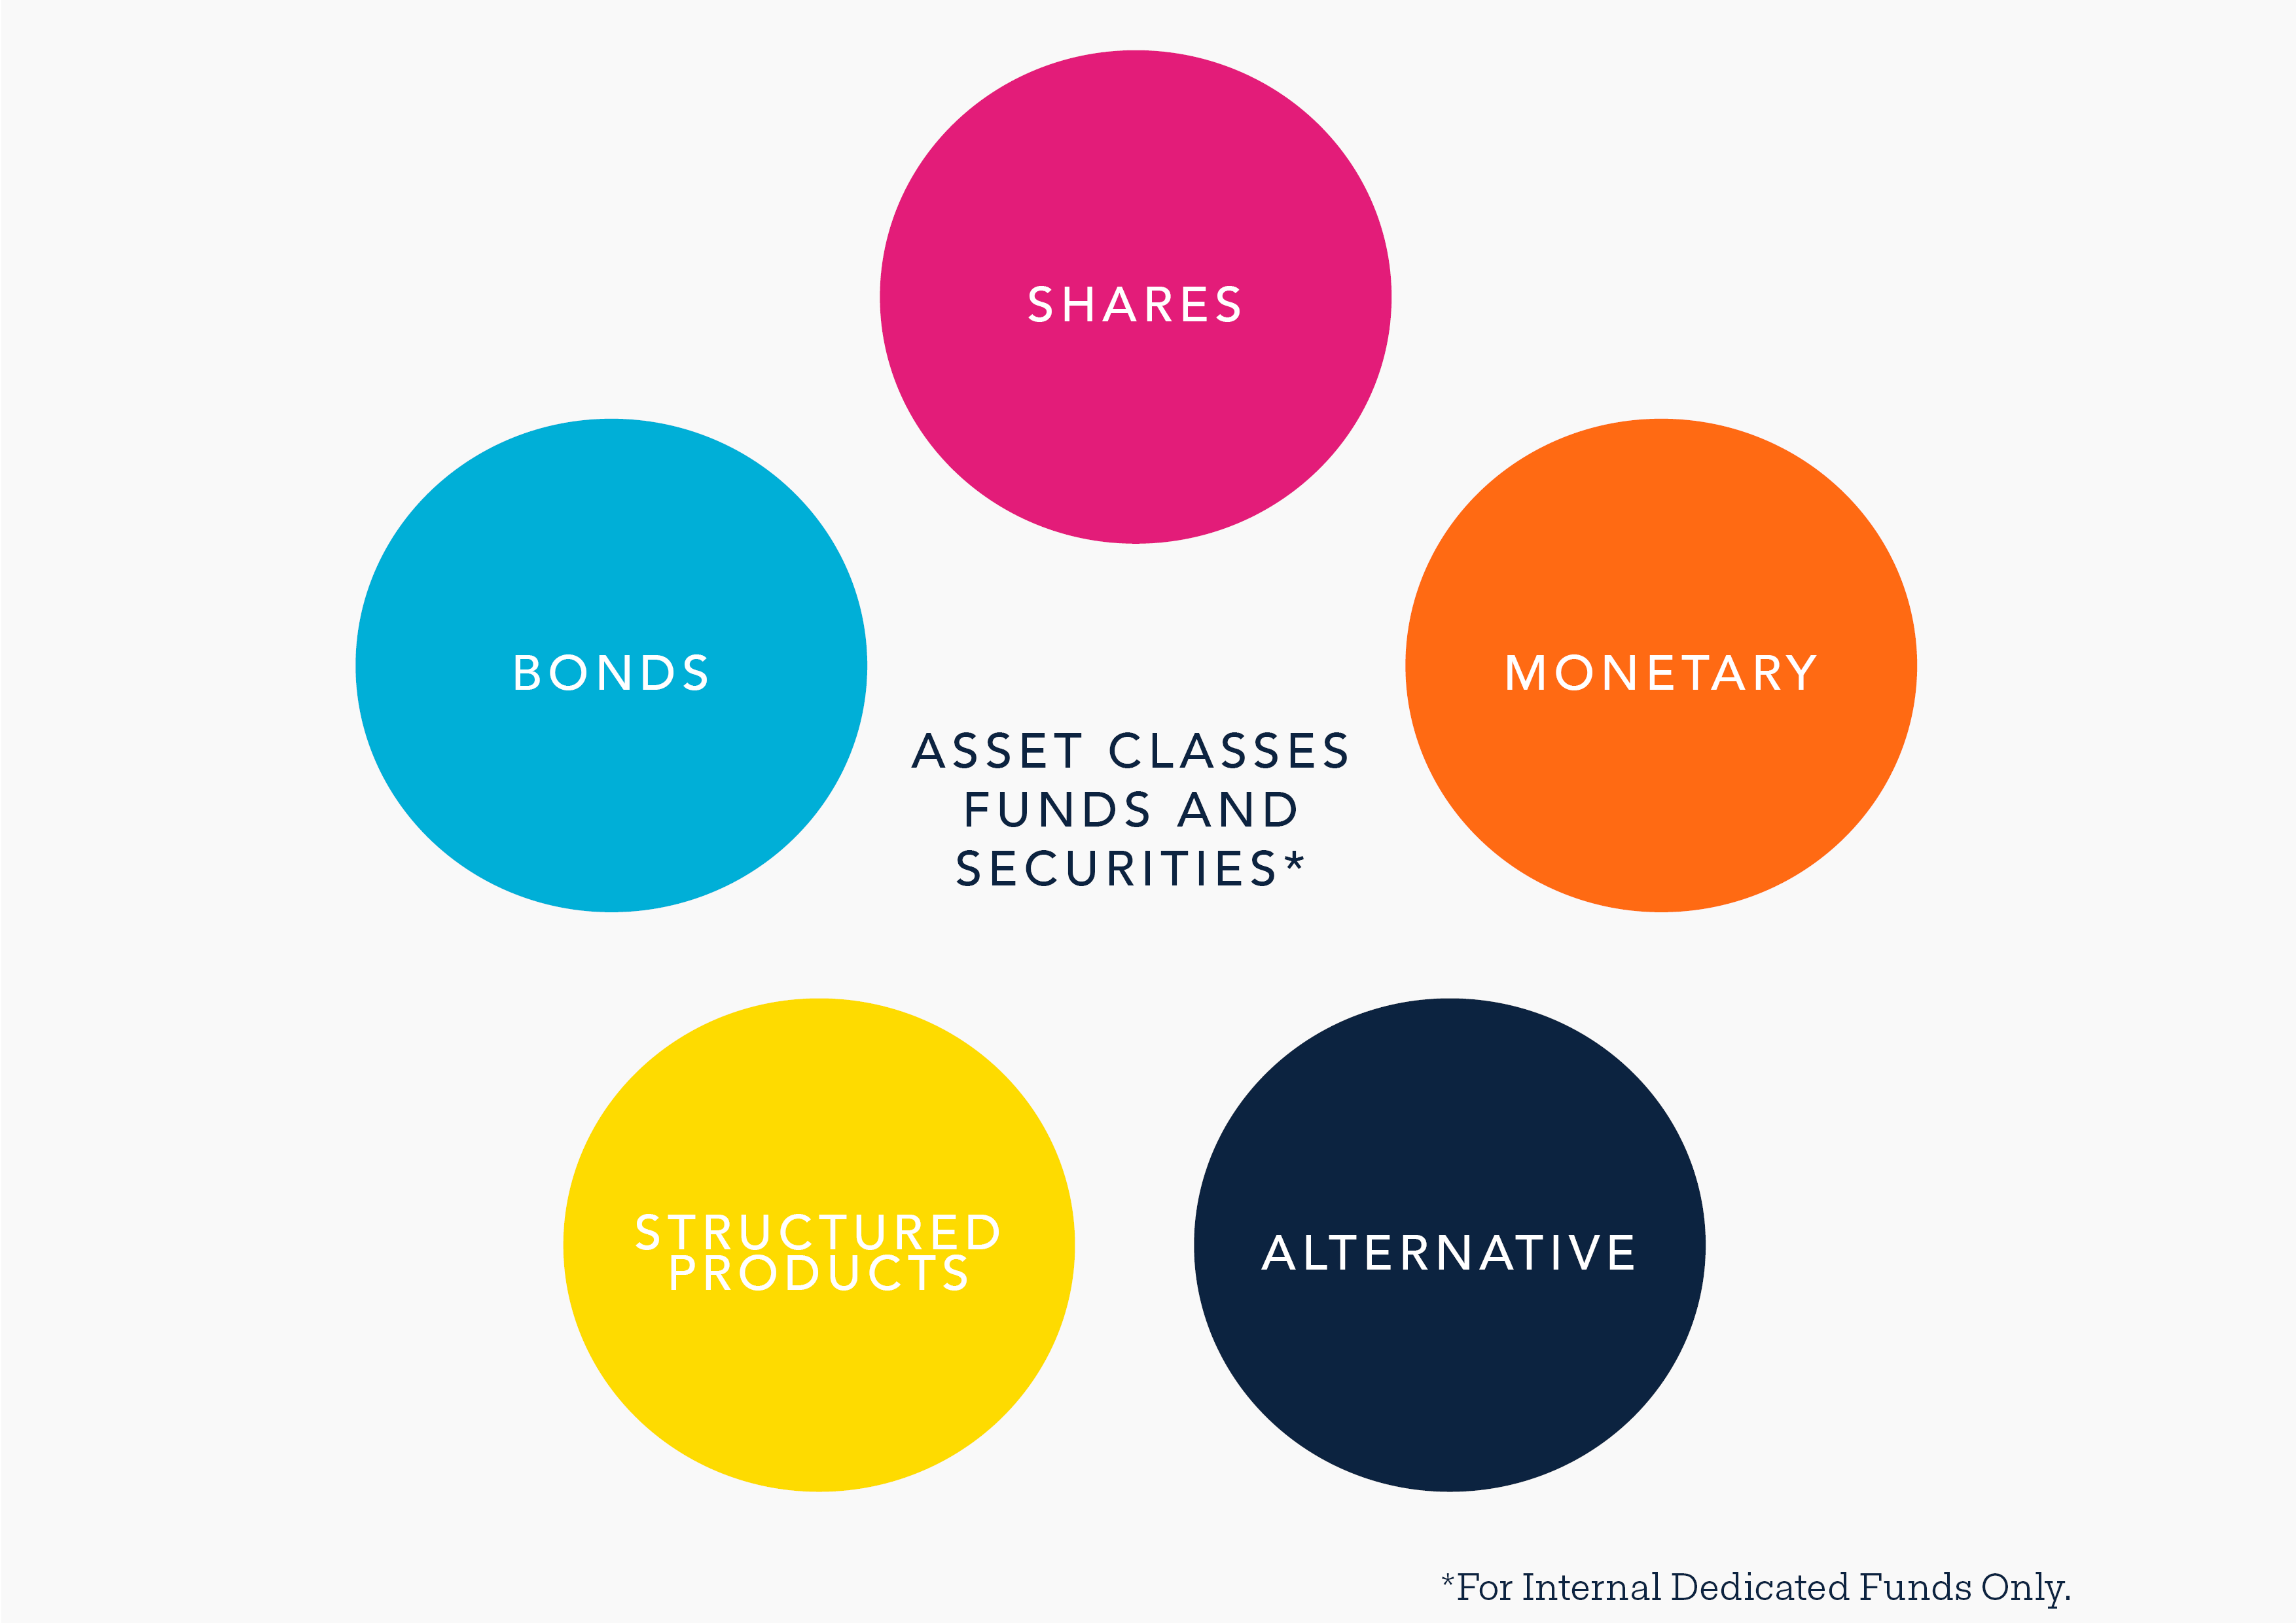 Asset classes funds and securities